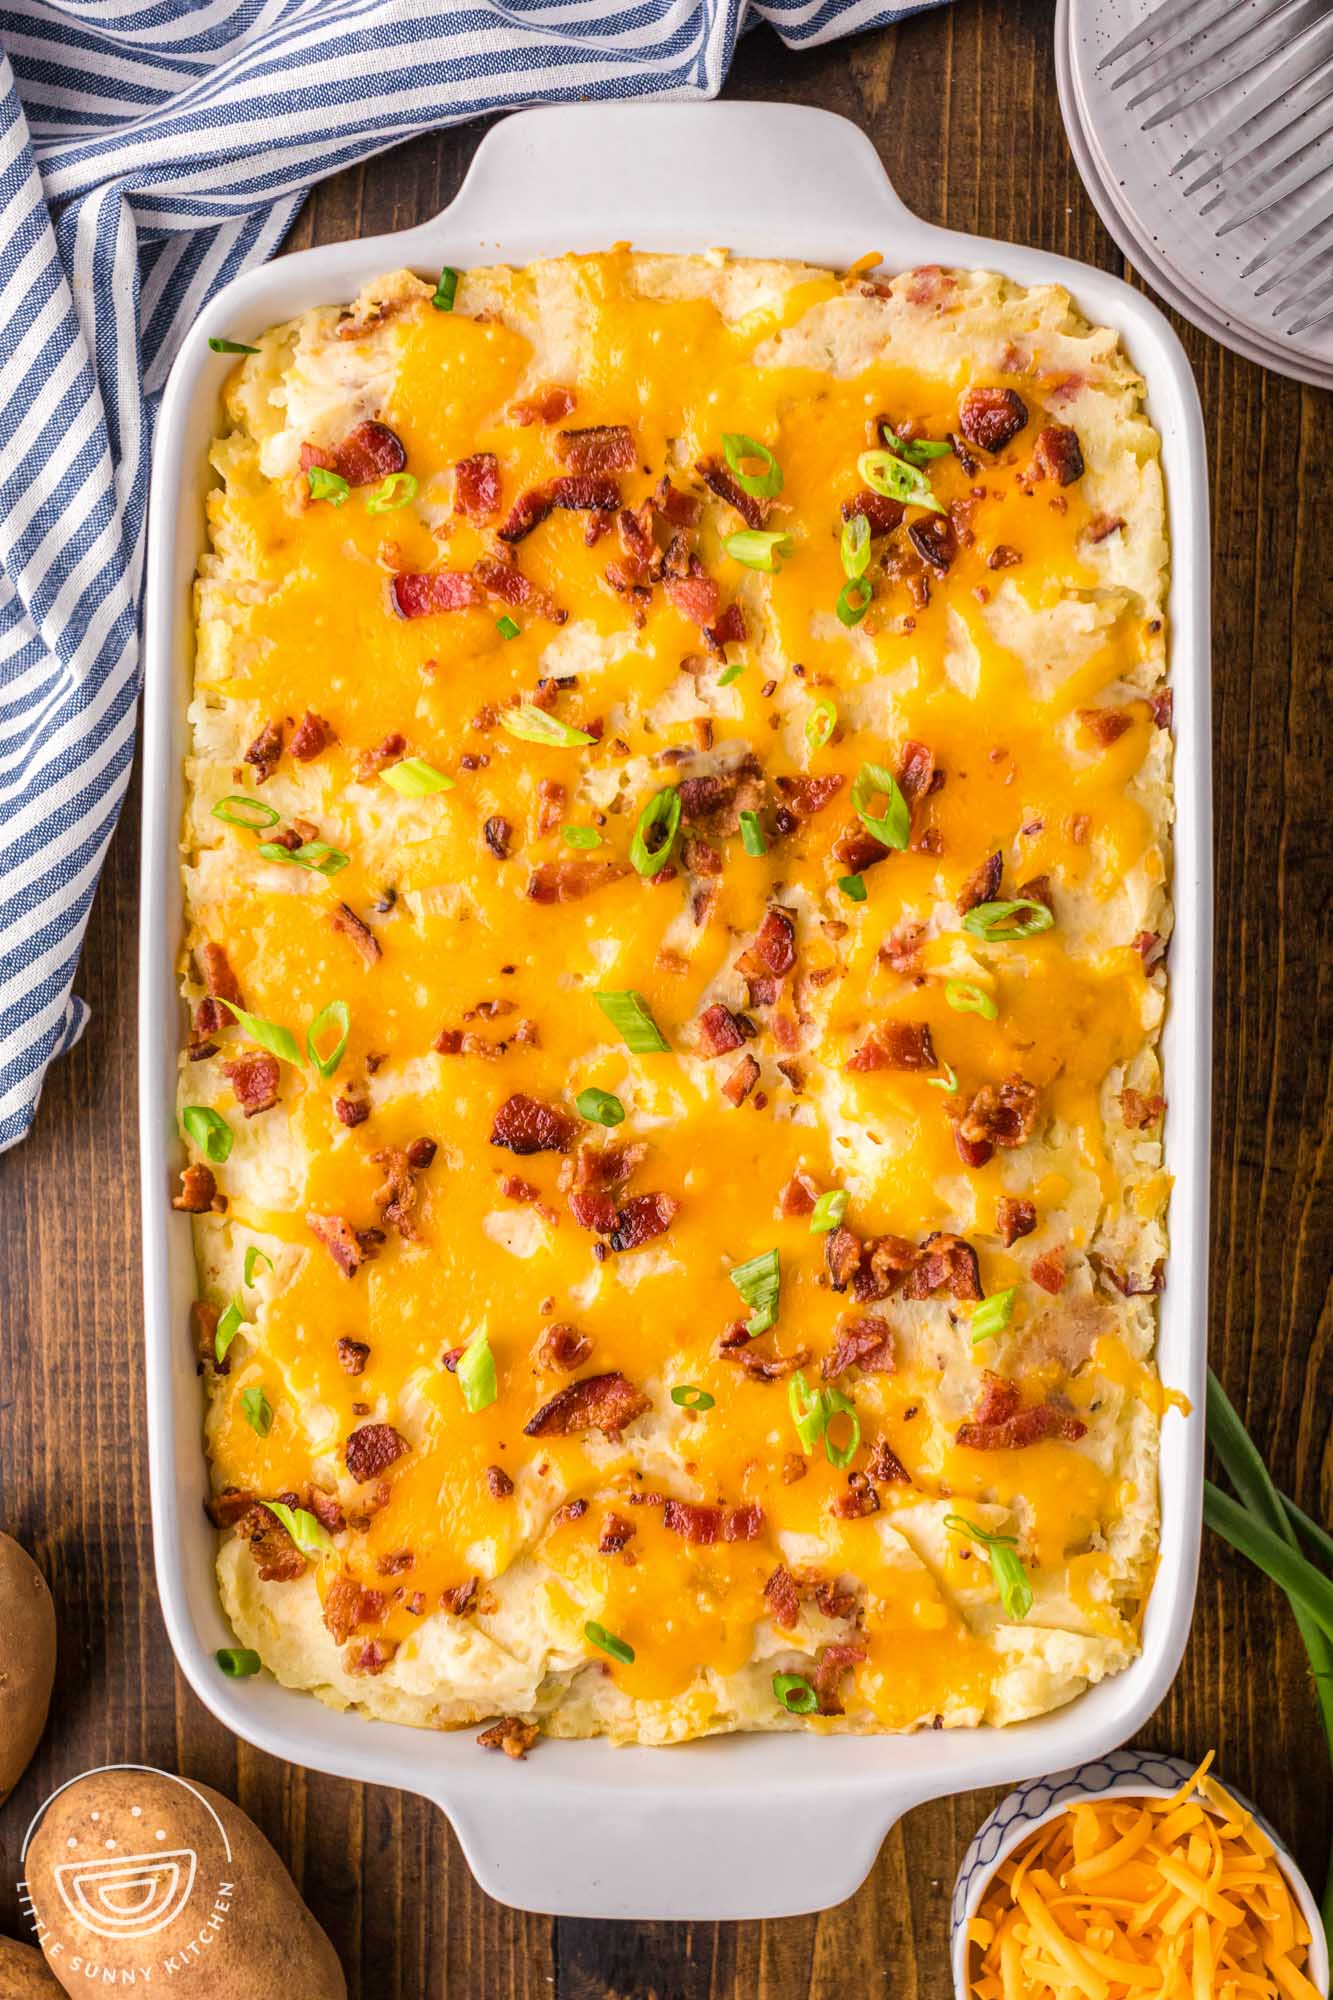 twice baked potato casserole topped with cheese, bacon, and green onions, in a white 9x13-inch baking dish, viewed from above.